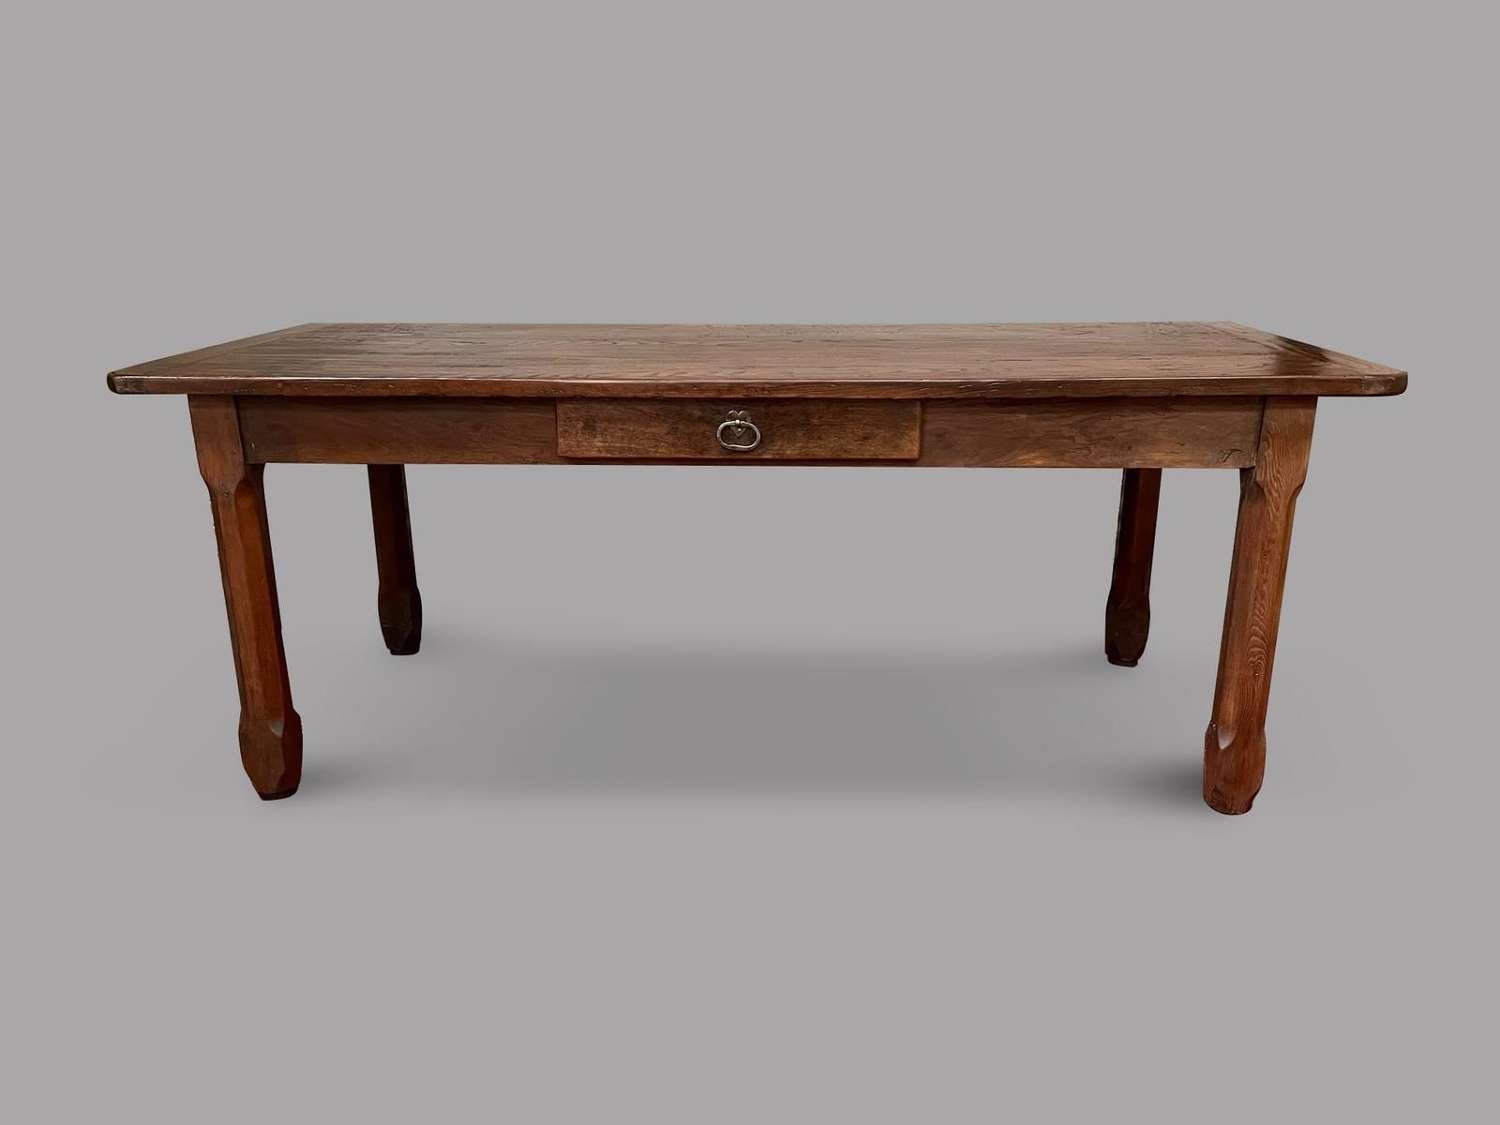 Normandy French Farmhouse Table c.1900